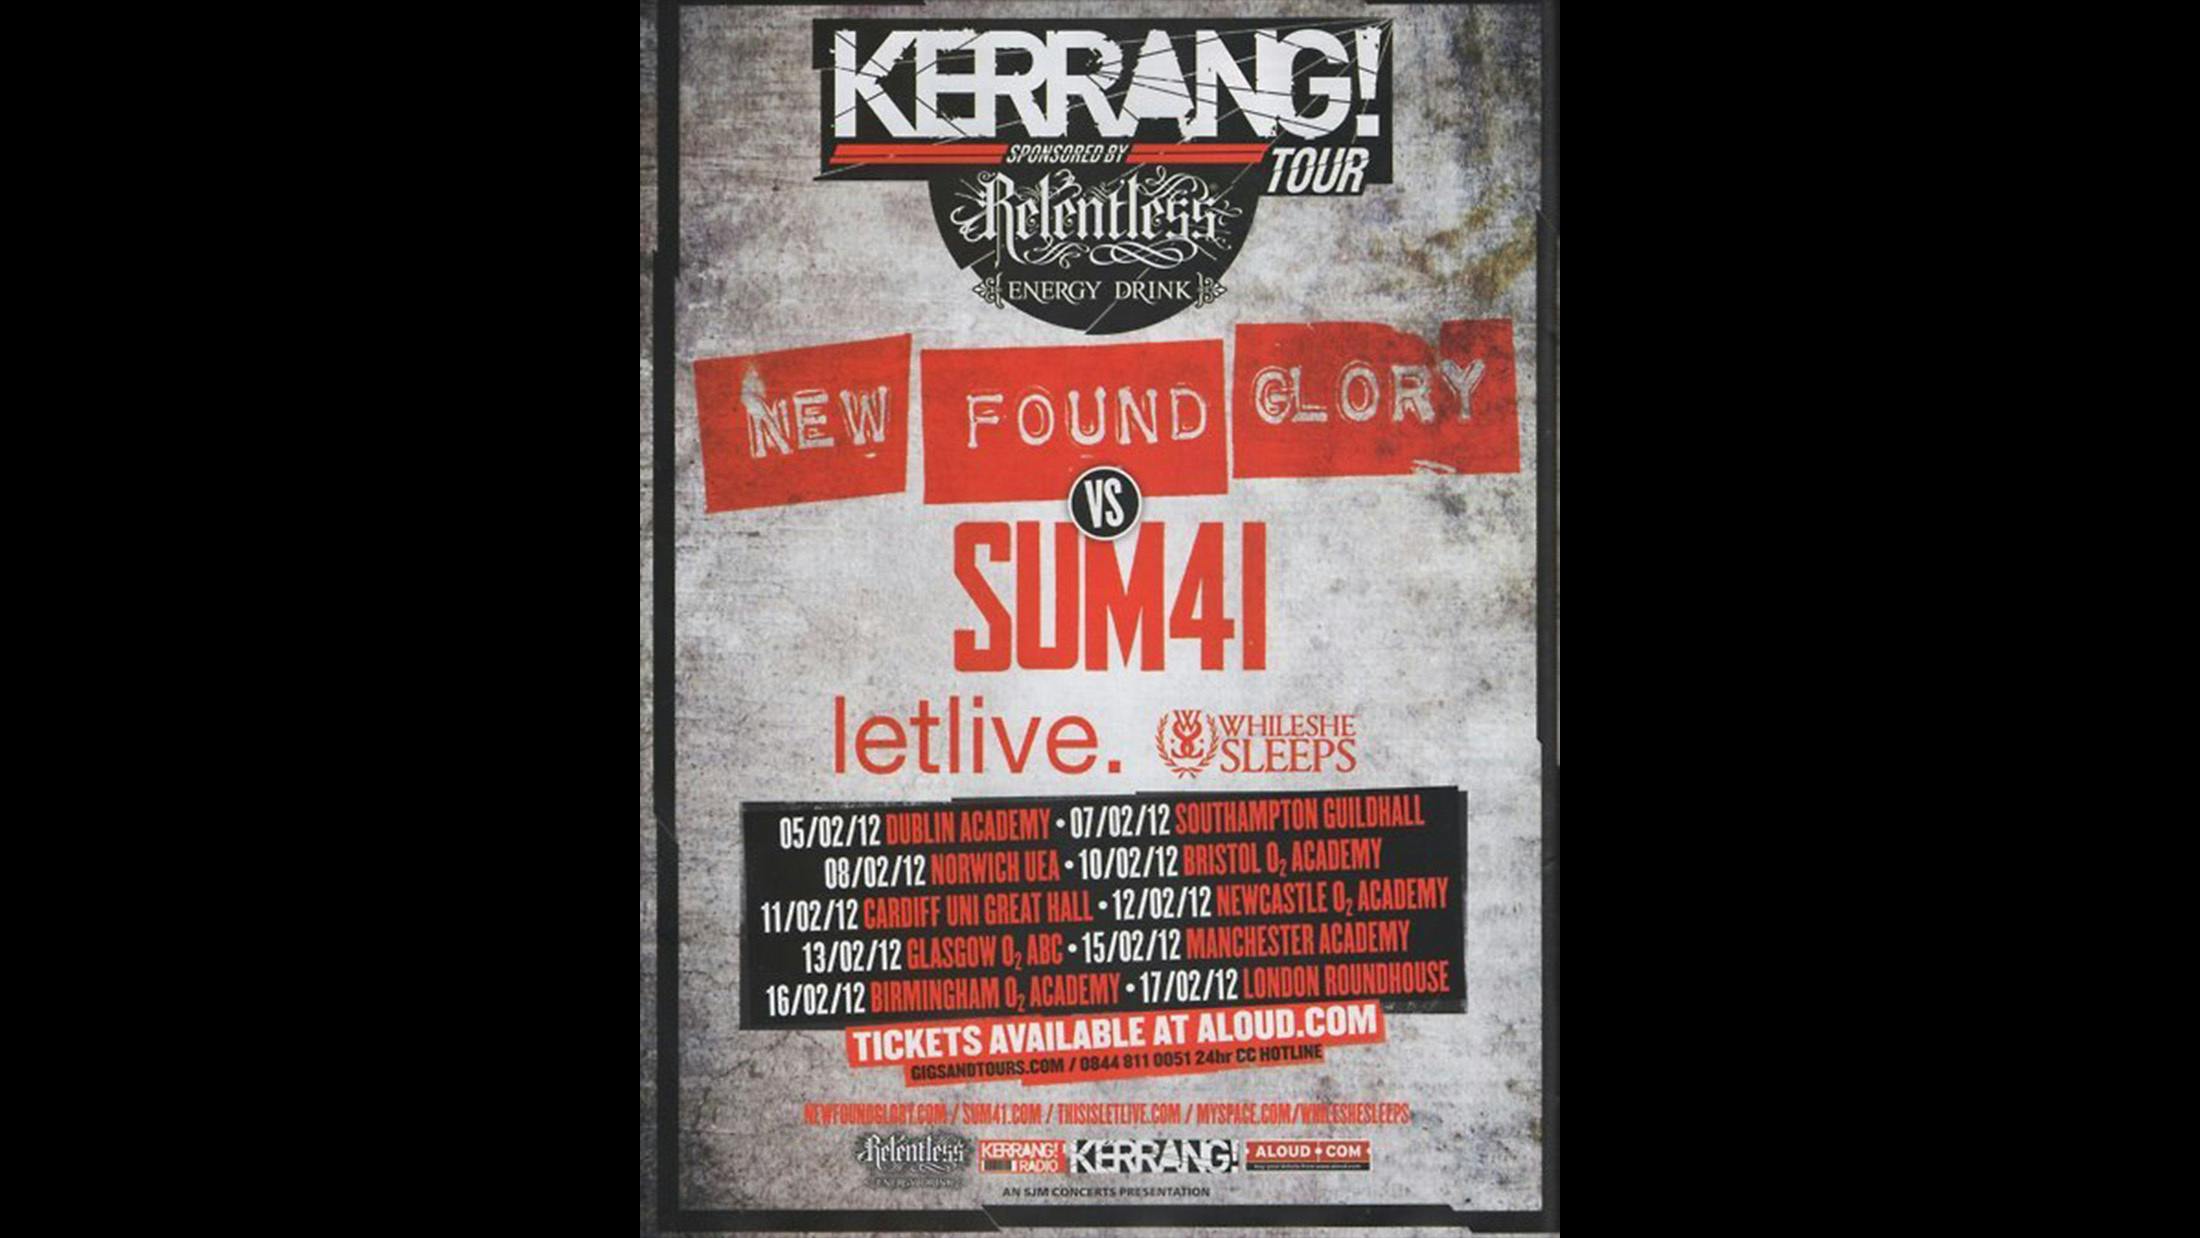 If you were a fly on the wall in the Kerrang! offices in the days leading up to our seventh tour, you’d have seen much wailing and gnashing of teeth. It transpired Sum 41 frontman Deryck Whibley had suffered a back injury and his band had to pull out of the tour at the eleventh hour. Luckily for us – and you, more importantly – K! Tour veterans The Blackout stepped in like bloody heroes, joining New Found Glory, letlive. and While She Sleeps. “We know what a total laugh the tour is and we’re delighted to step in,” said co-vocalist Sean Smith. “But hopefully Sum 41 fans won’t try to murder us!” Guess what? They didn’t. Not one attempt.